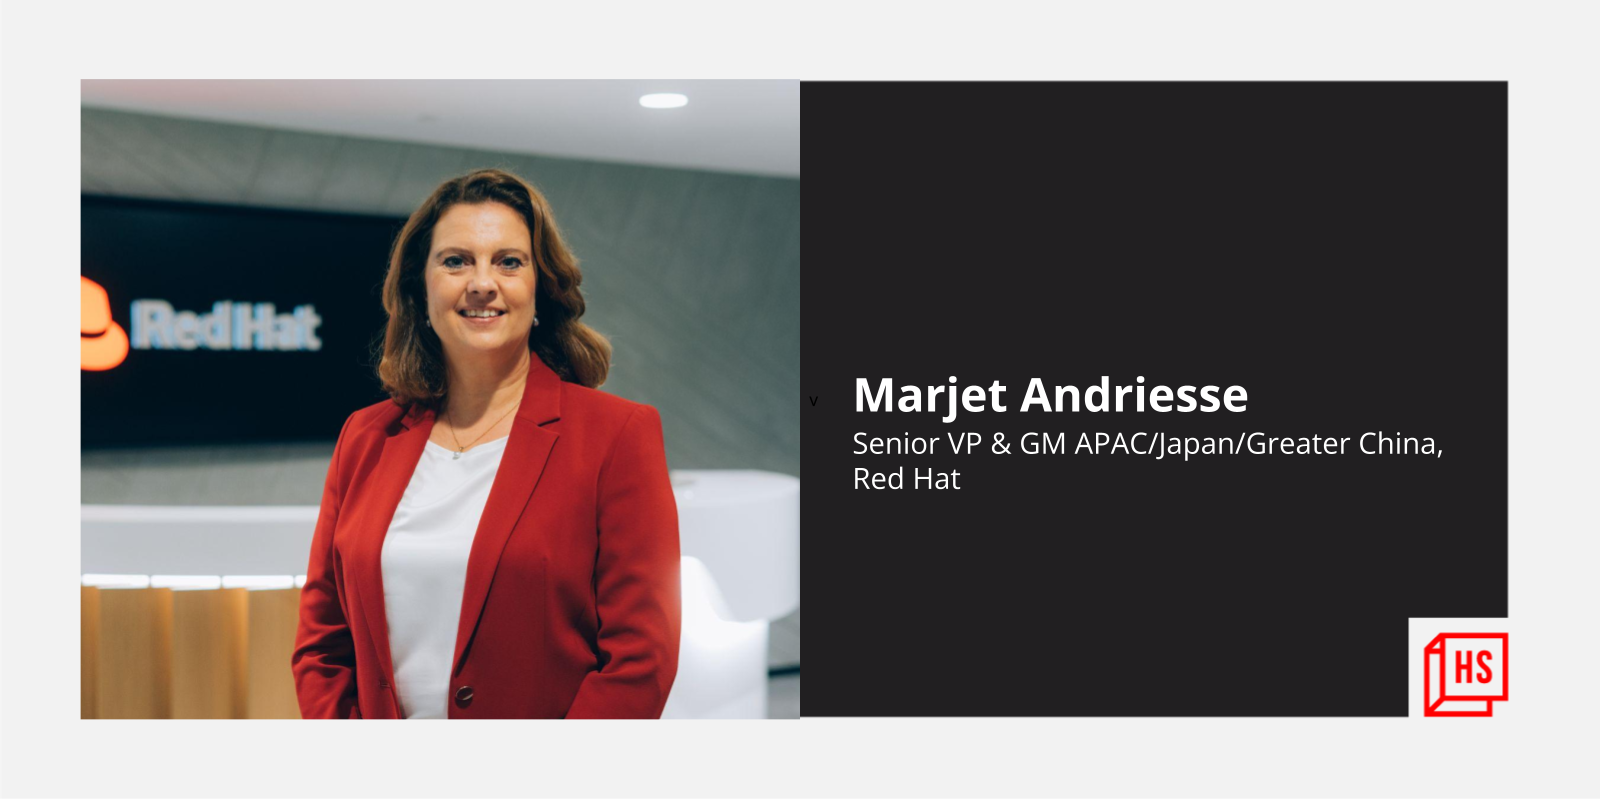 [Women in Tech] Diversity and inclusiveness are important to female talent: Marjet Andriesse of Red Hat